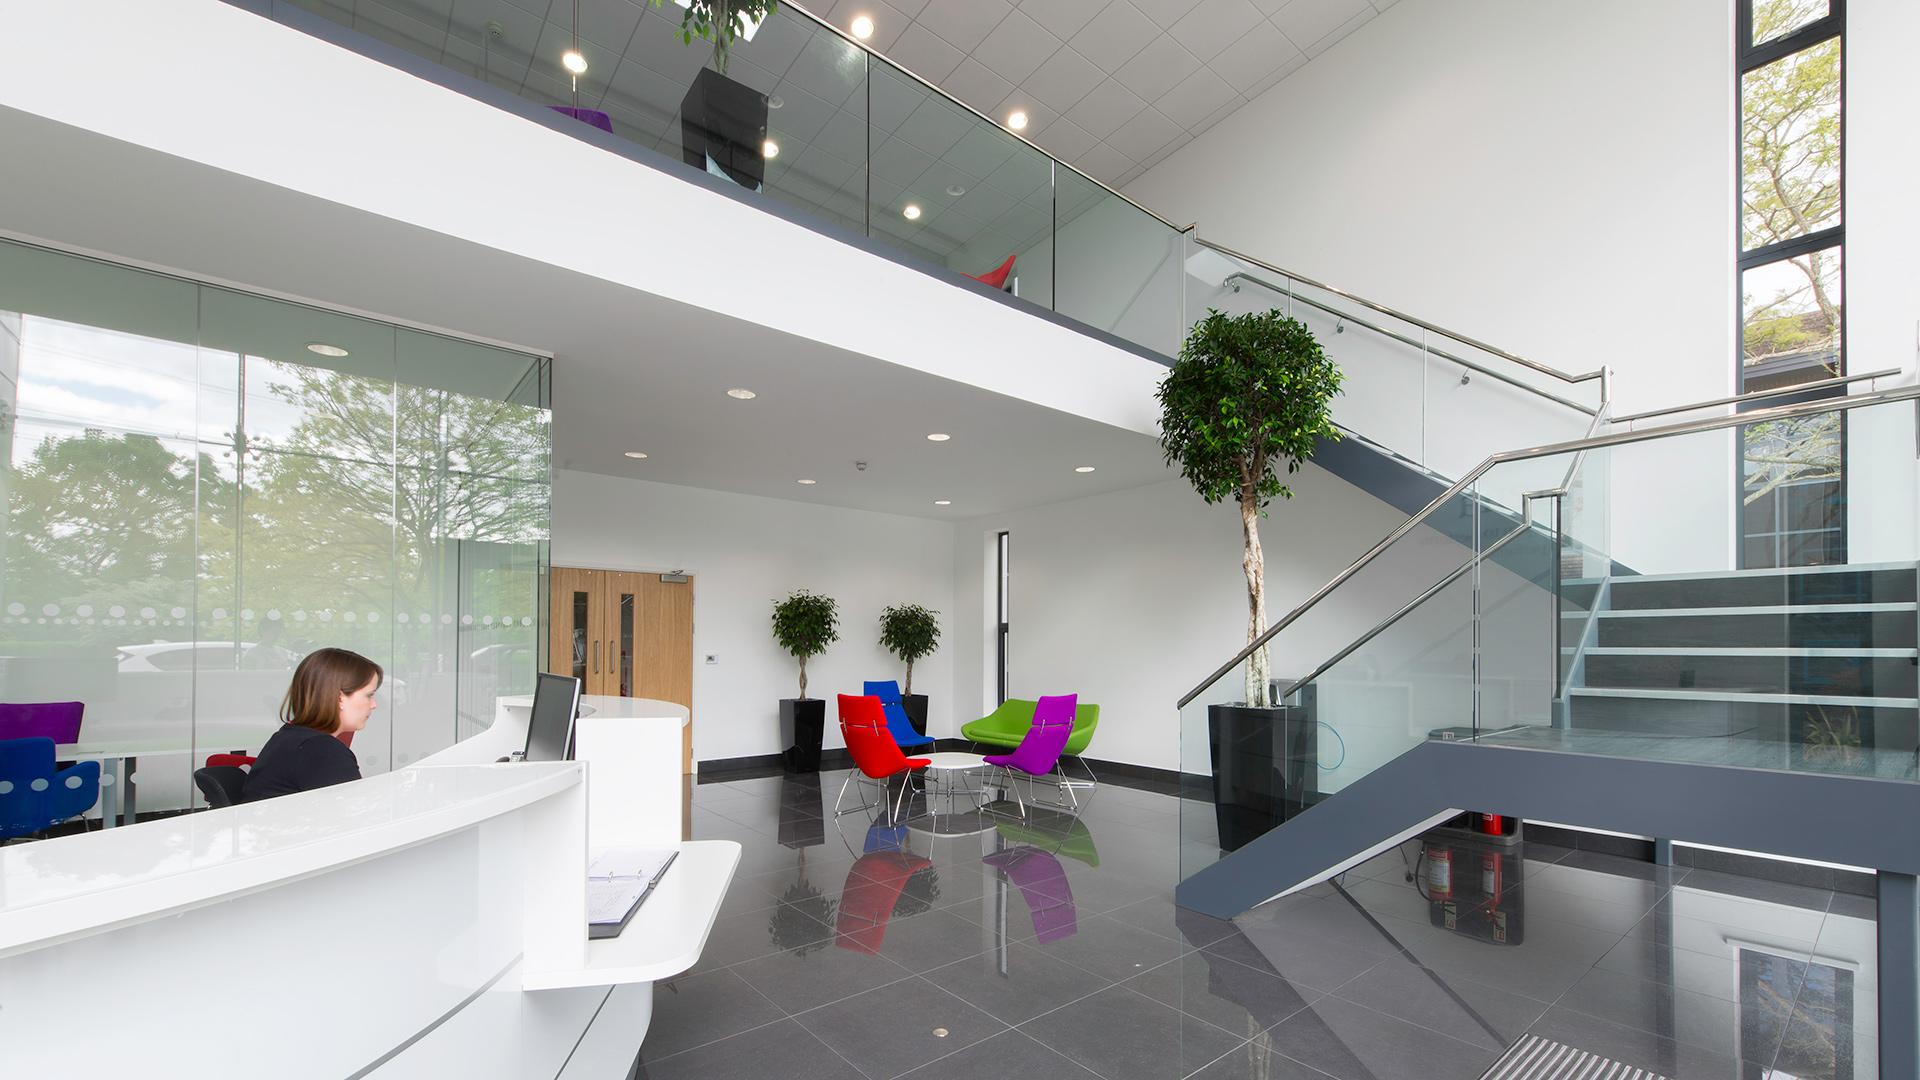 reception area with dog leg staircase leading to mezzanine floor